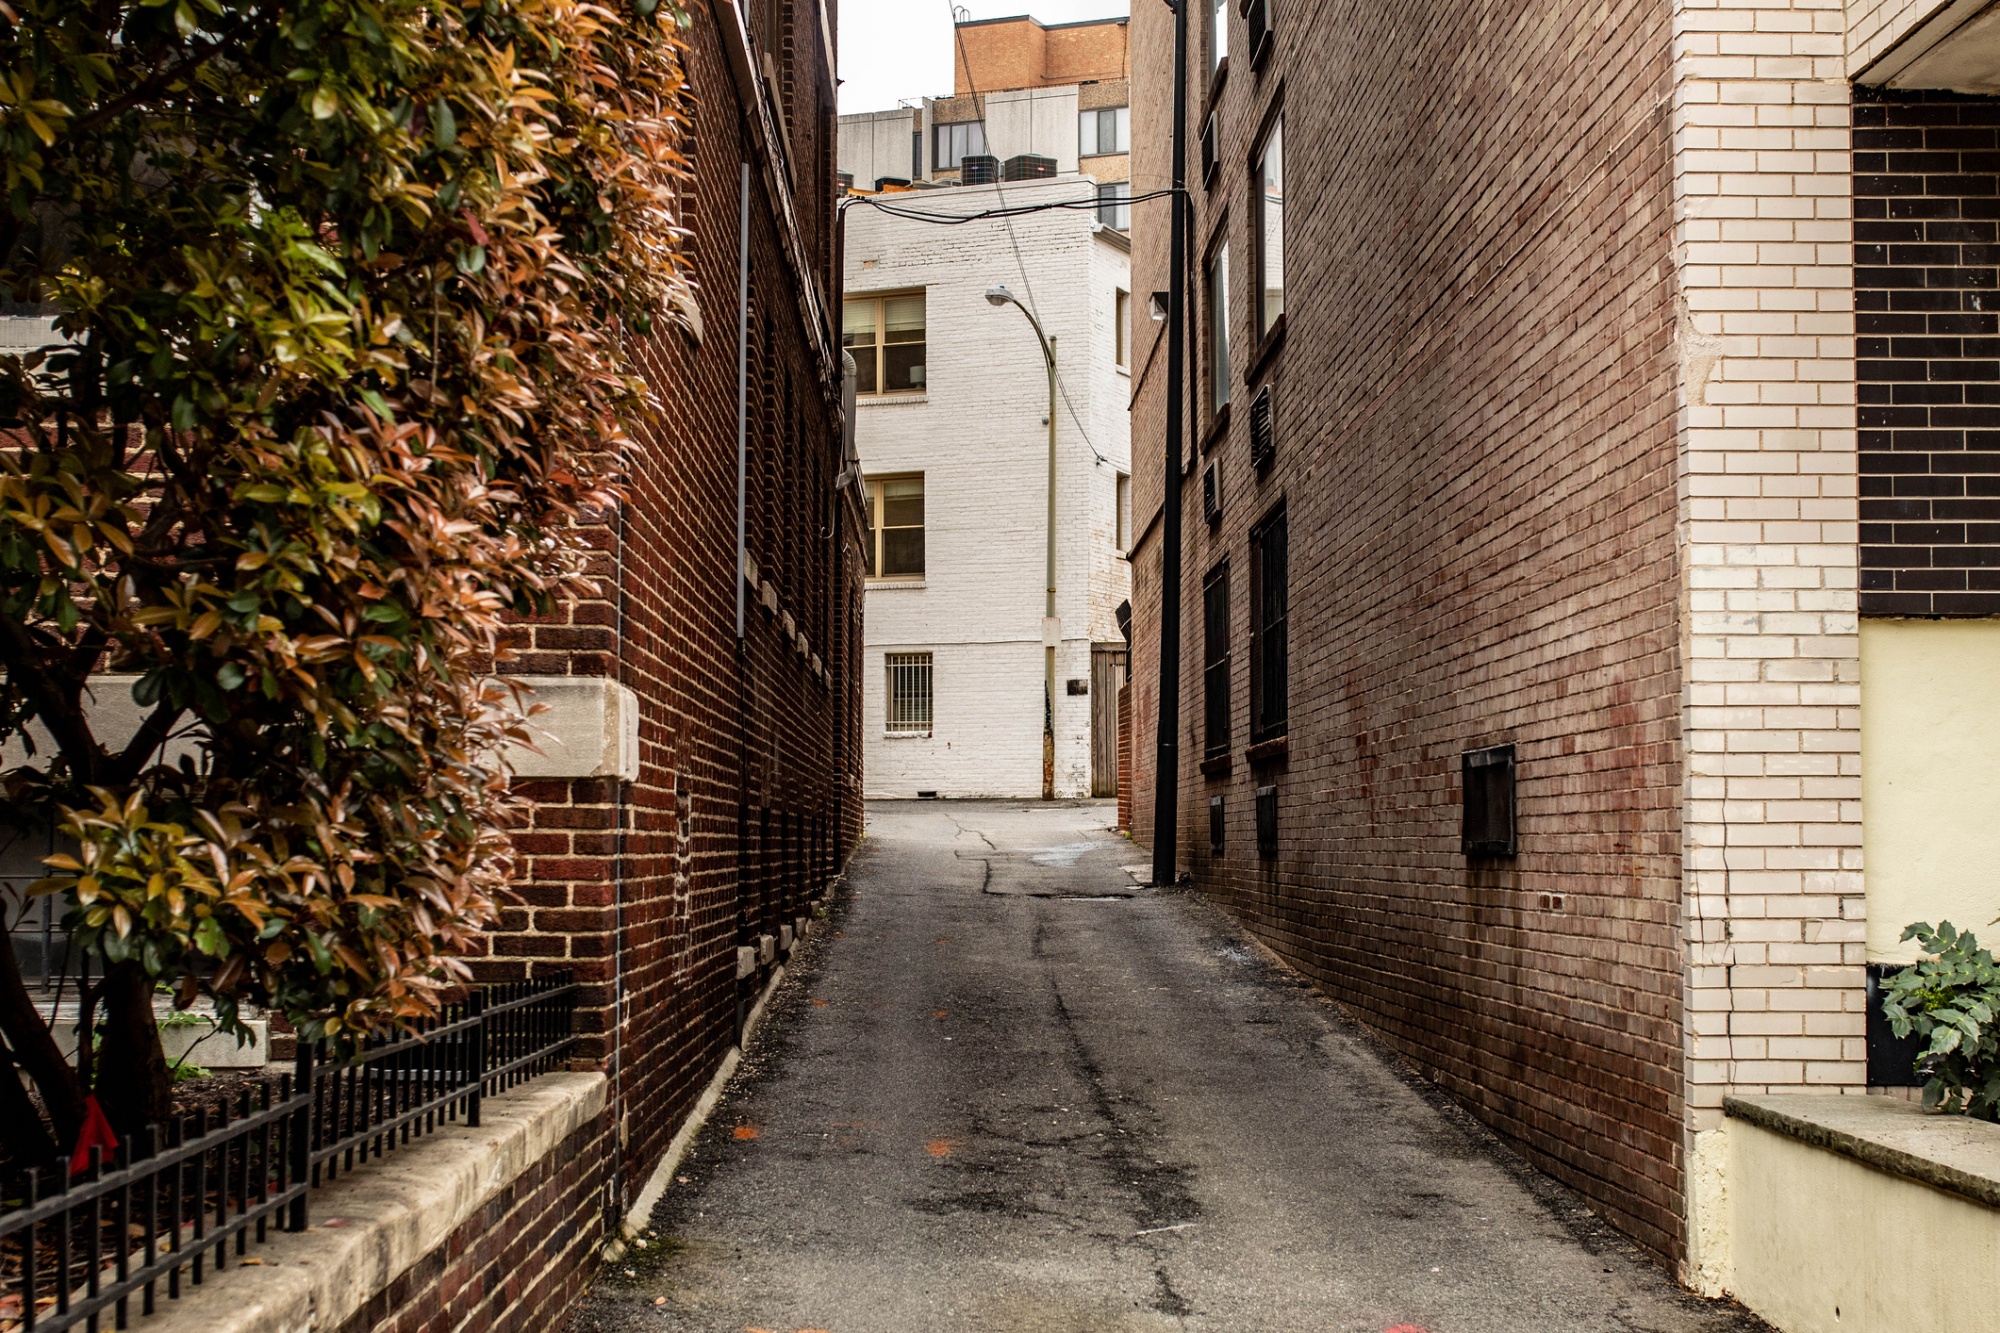 Washington D.C. Architecture in alley, © Kelvin Sterling Scott / iStock / Getty Images Plus